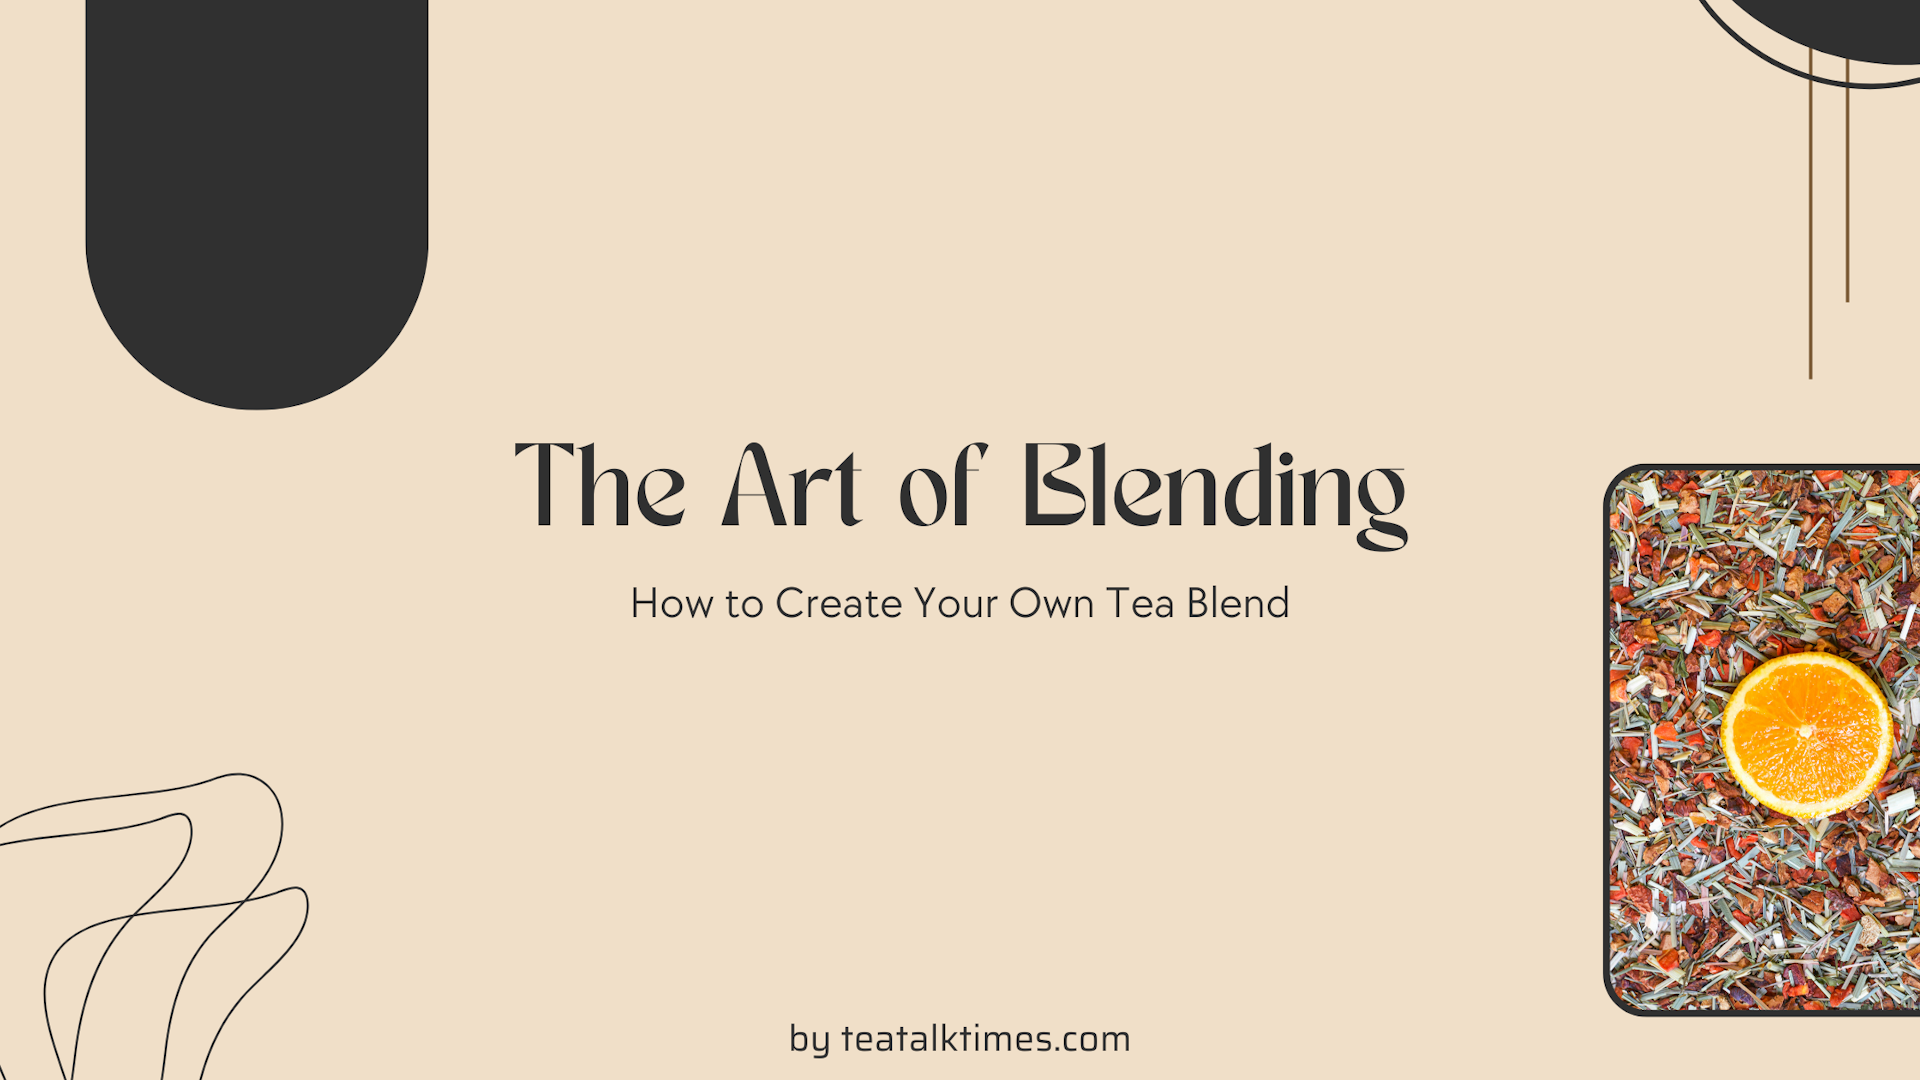 The Art of Blending: How to Create Your Own Tea Blend